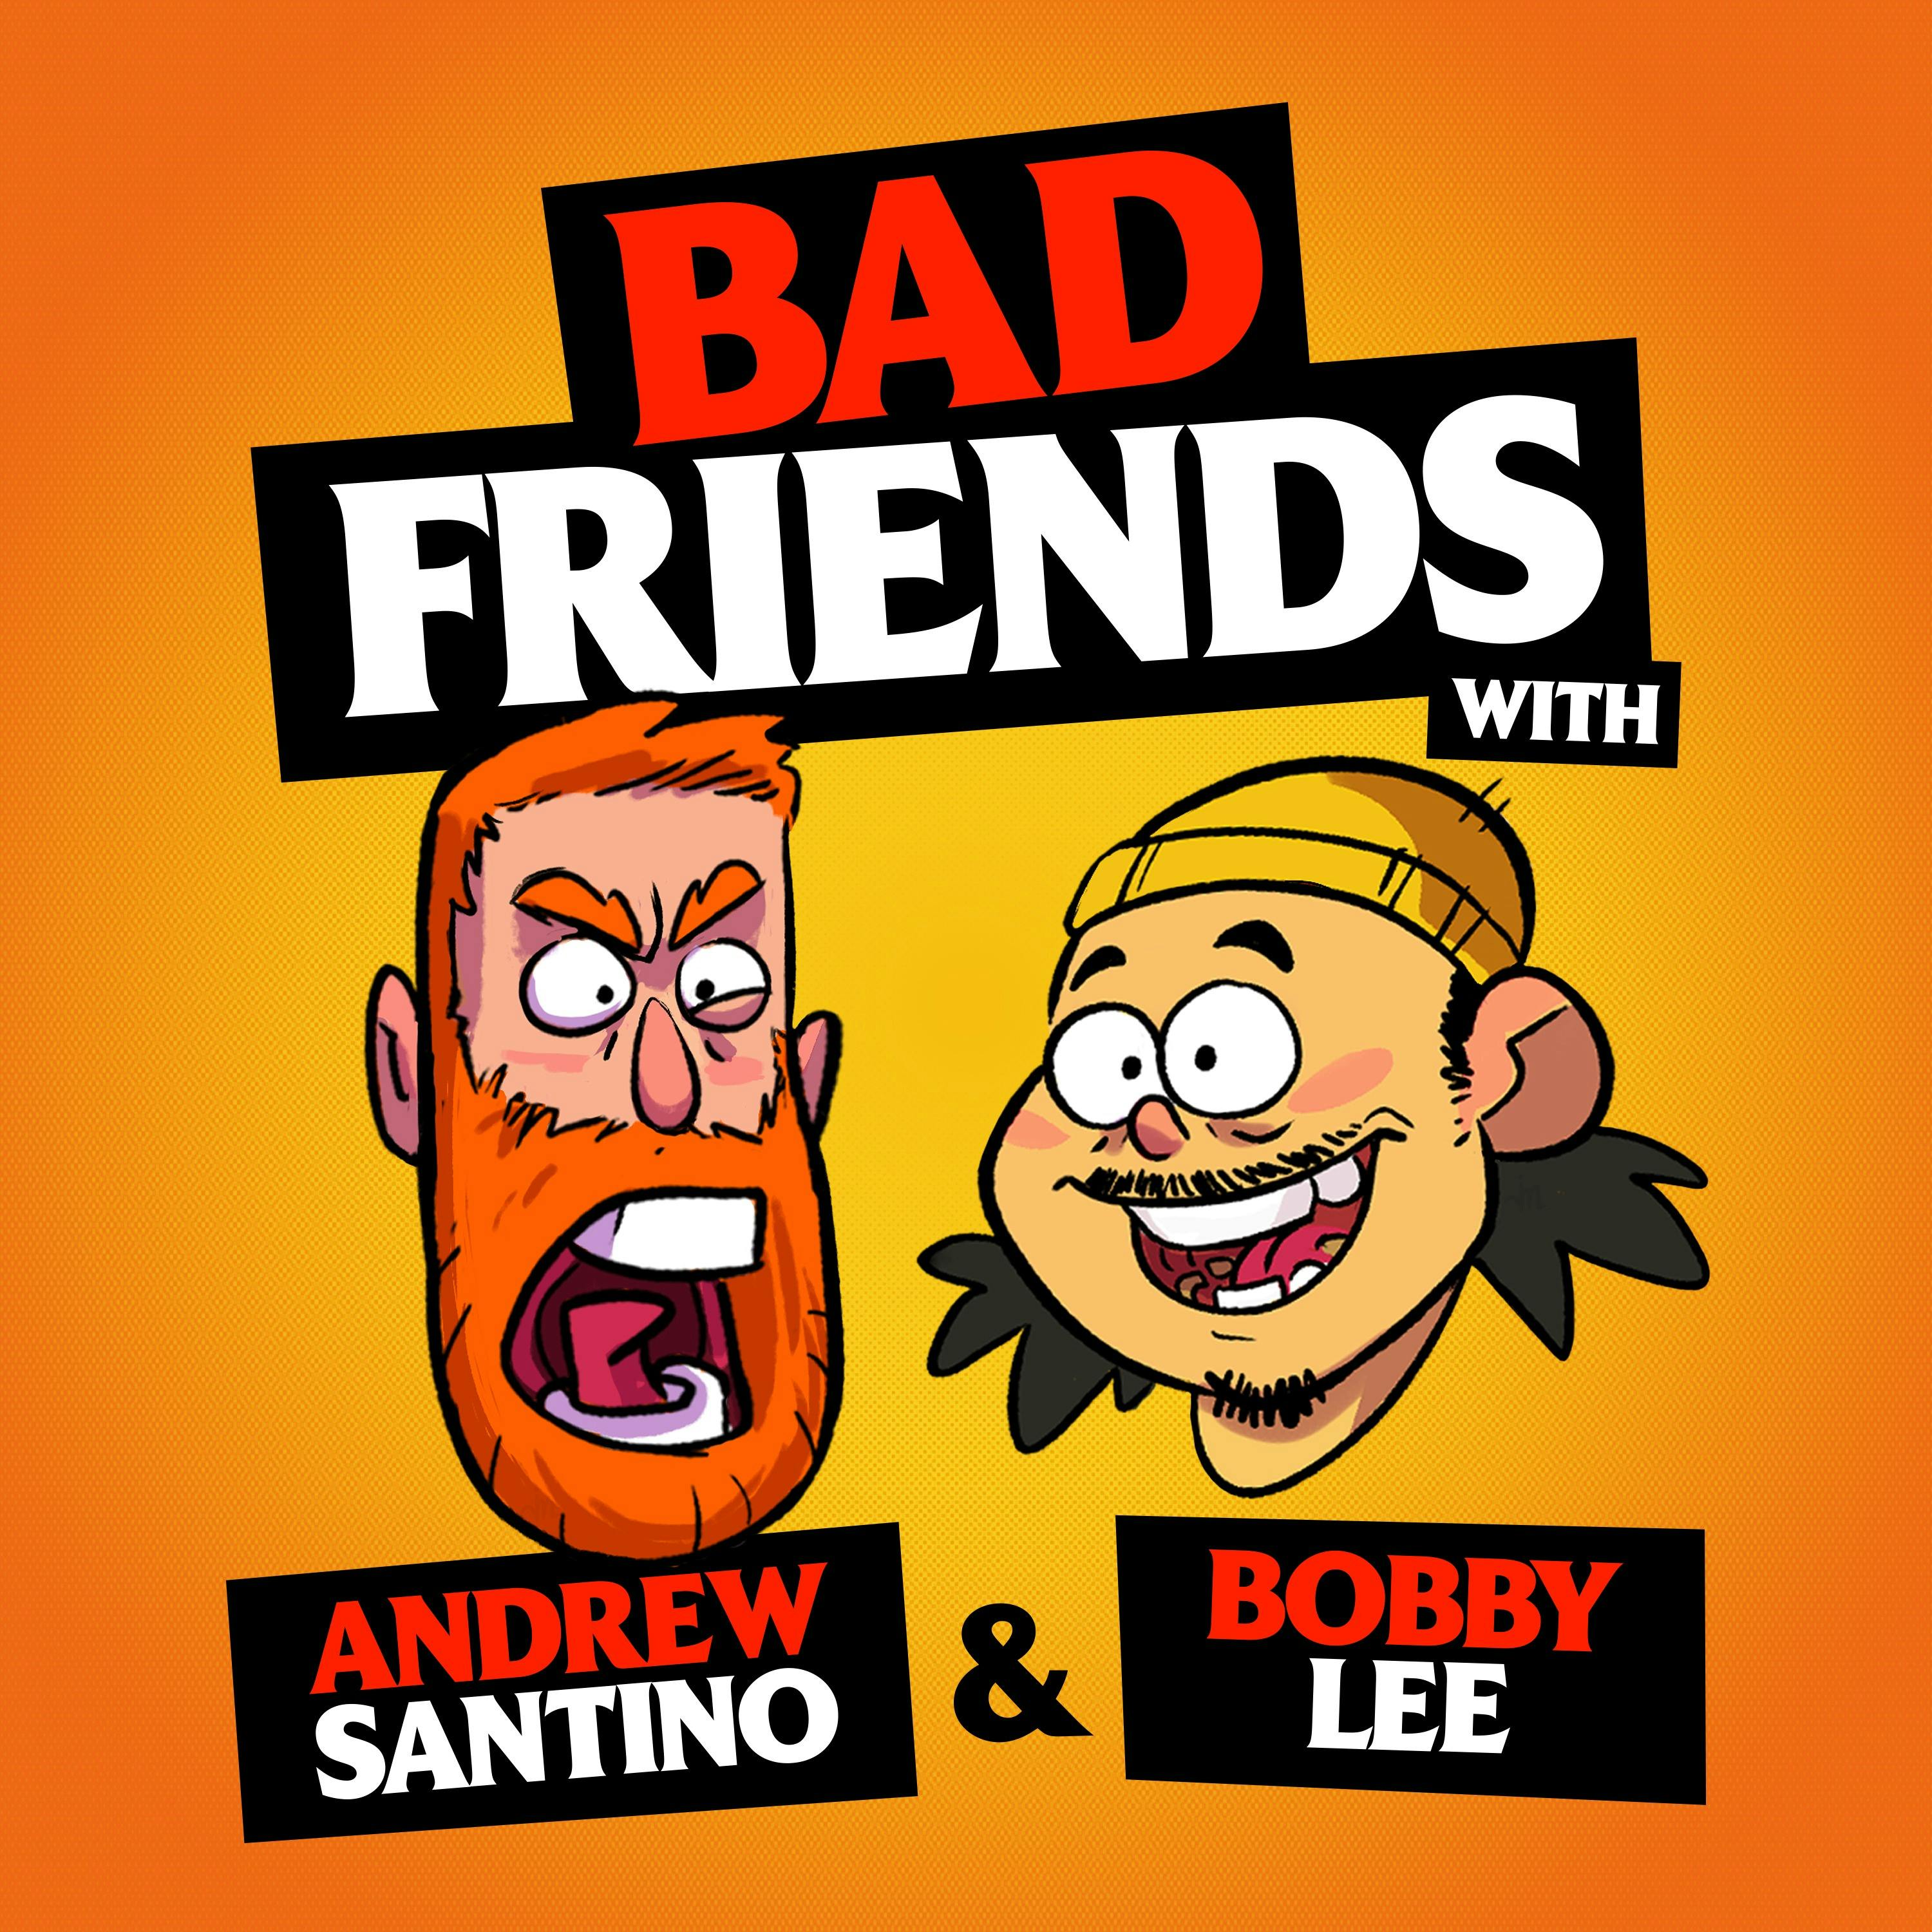 Bobby Lee Rocks the Scissor Bros by Andrew Santino and Bobby Lee